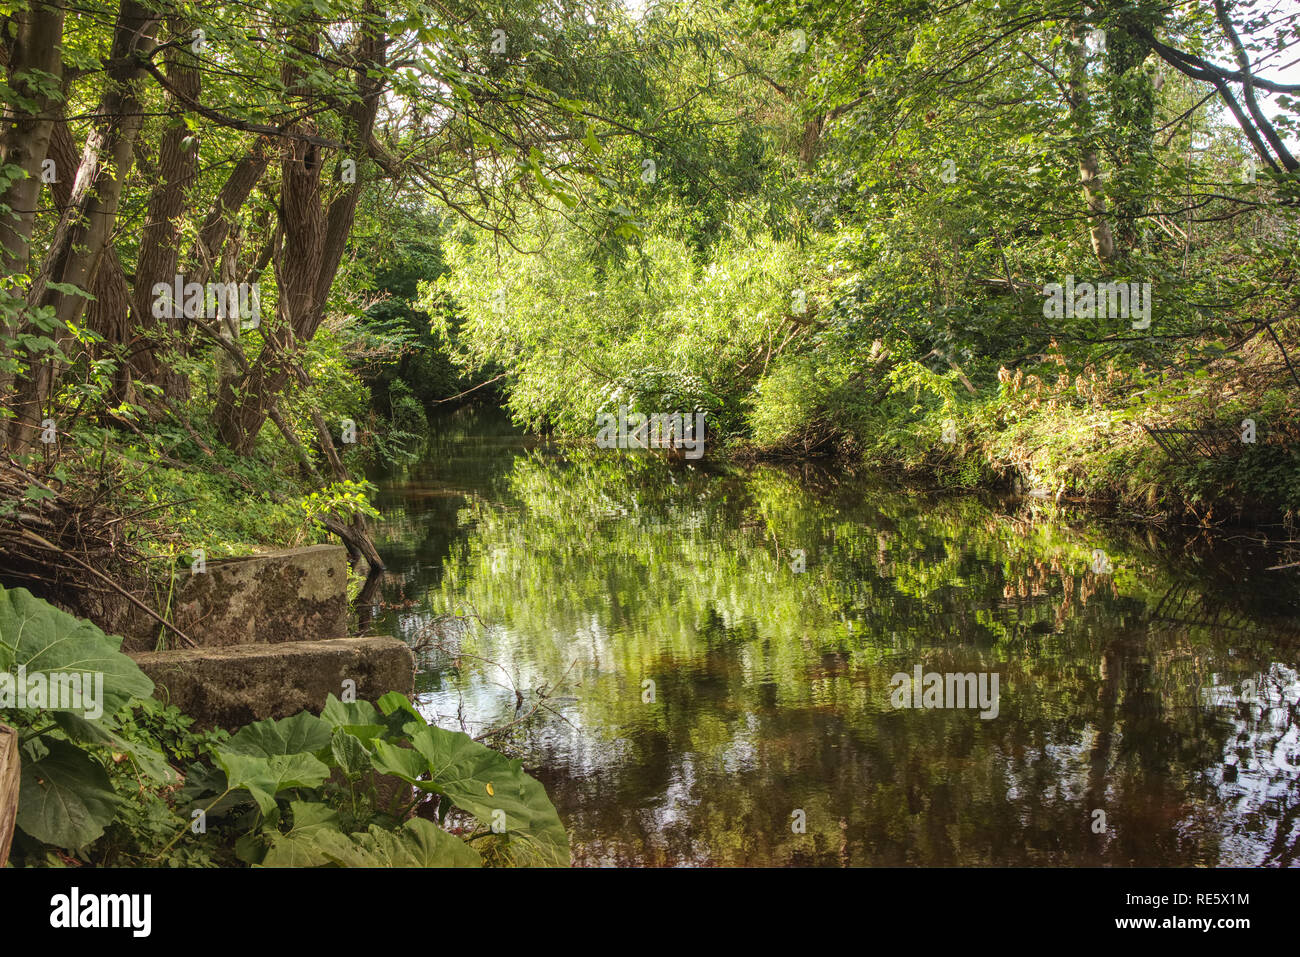 A photograph of the Water of Leith river in Edinburgh during the summer with lovely reflection of trees in the water. Stock Photo